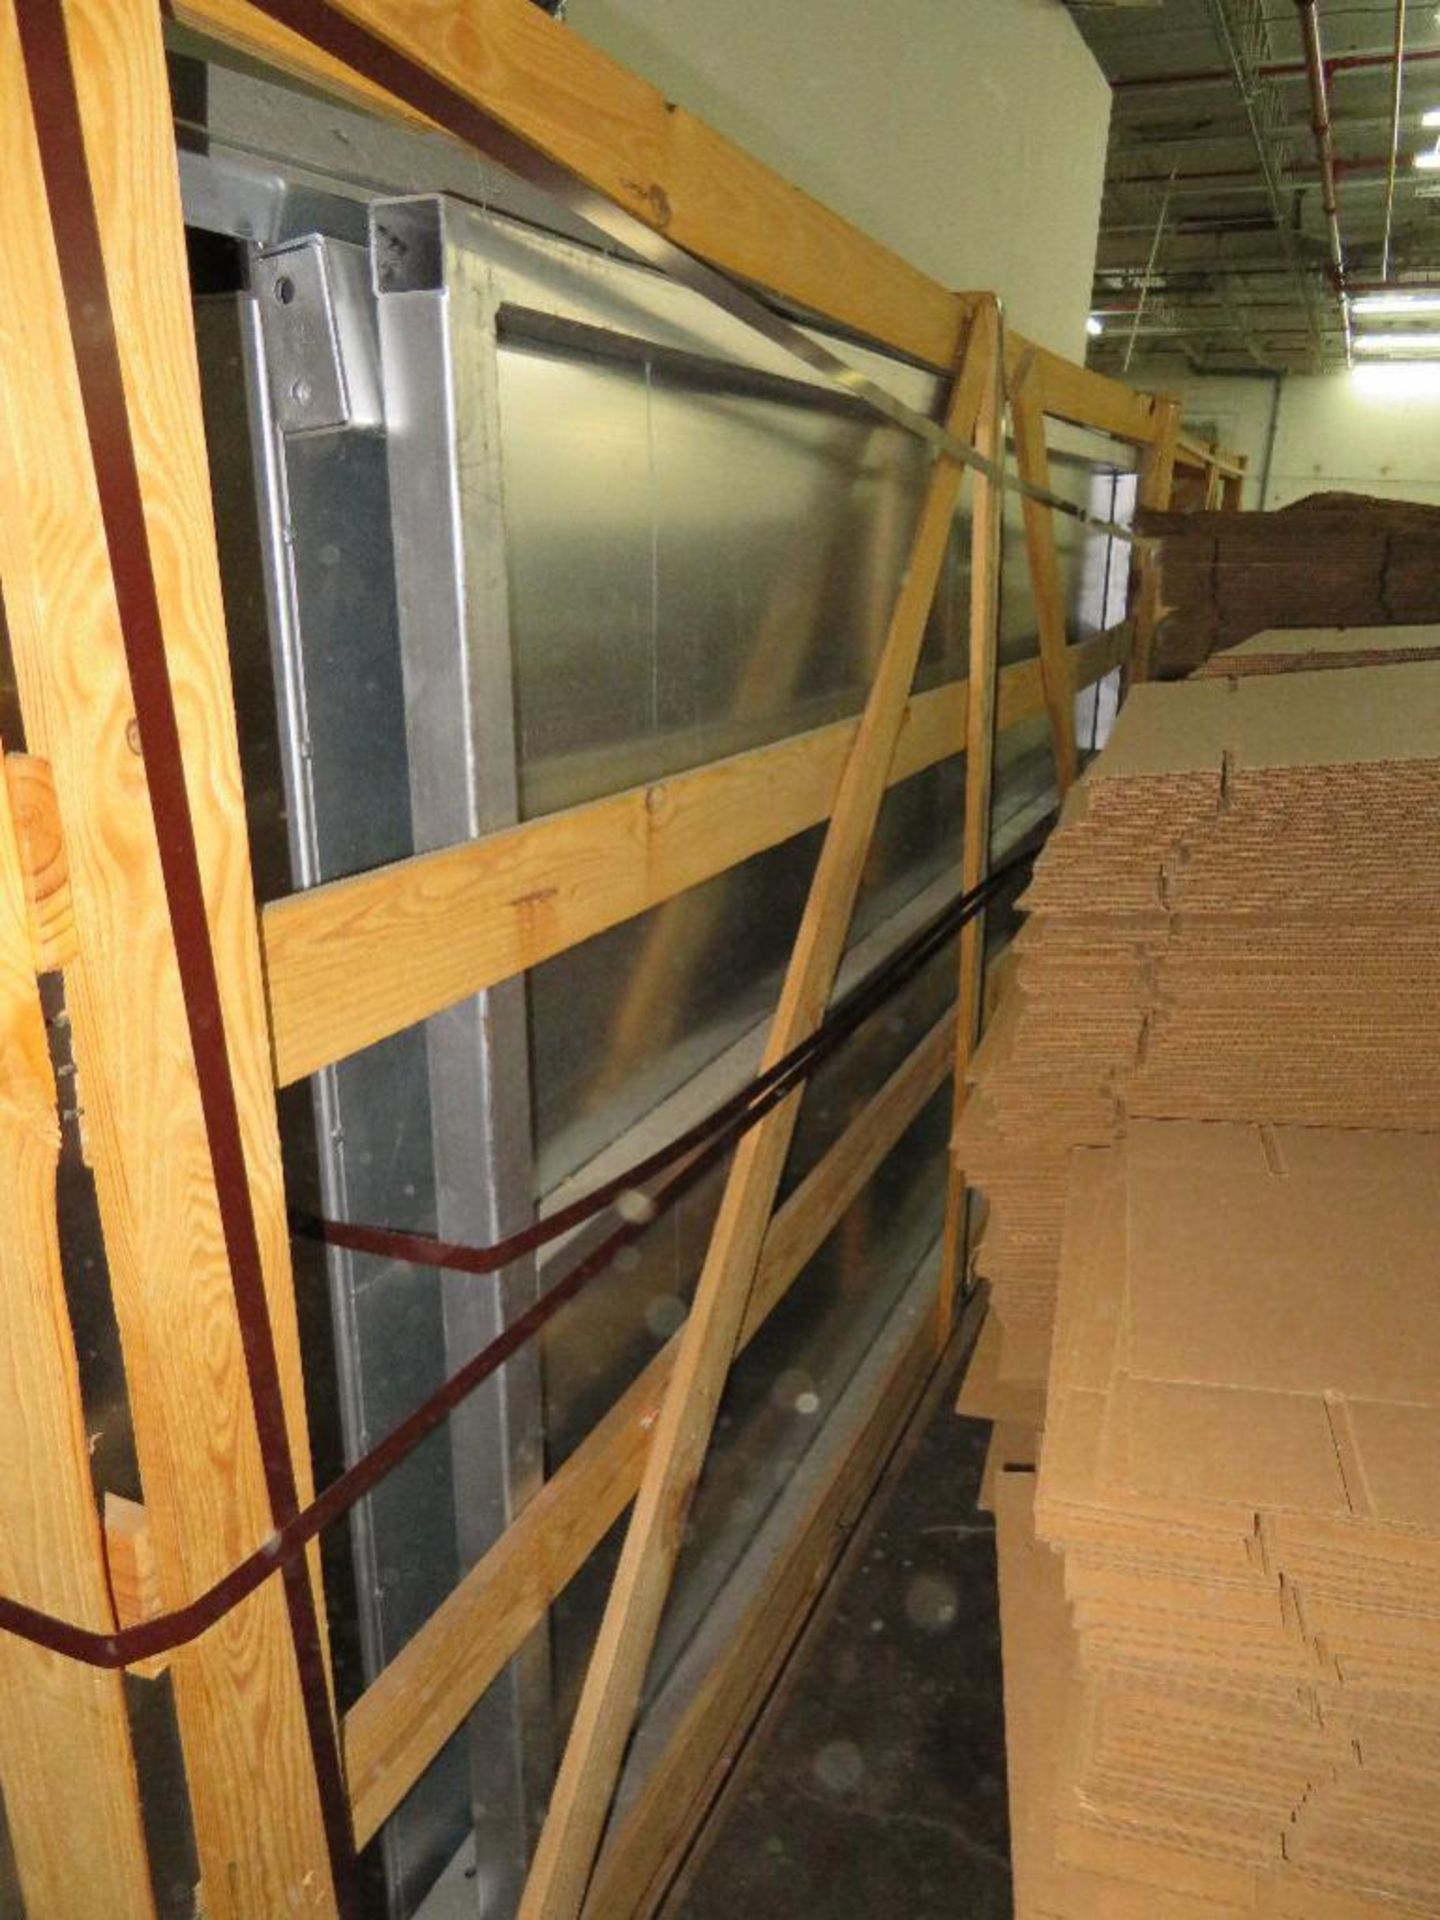 Unassembled Spray Paint Booth in (2) Shipping Crates Including Wall Panels, Lights, Venting, Circula - Image 3 of 4